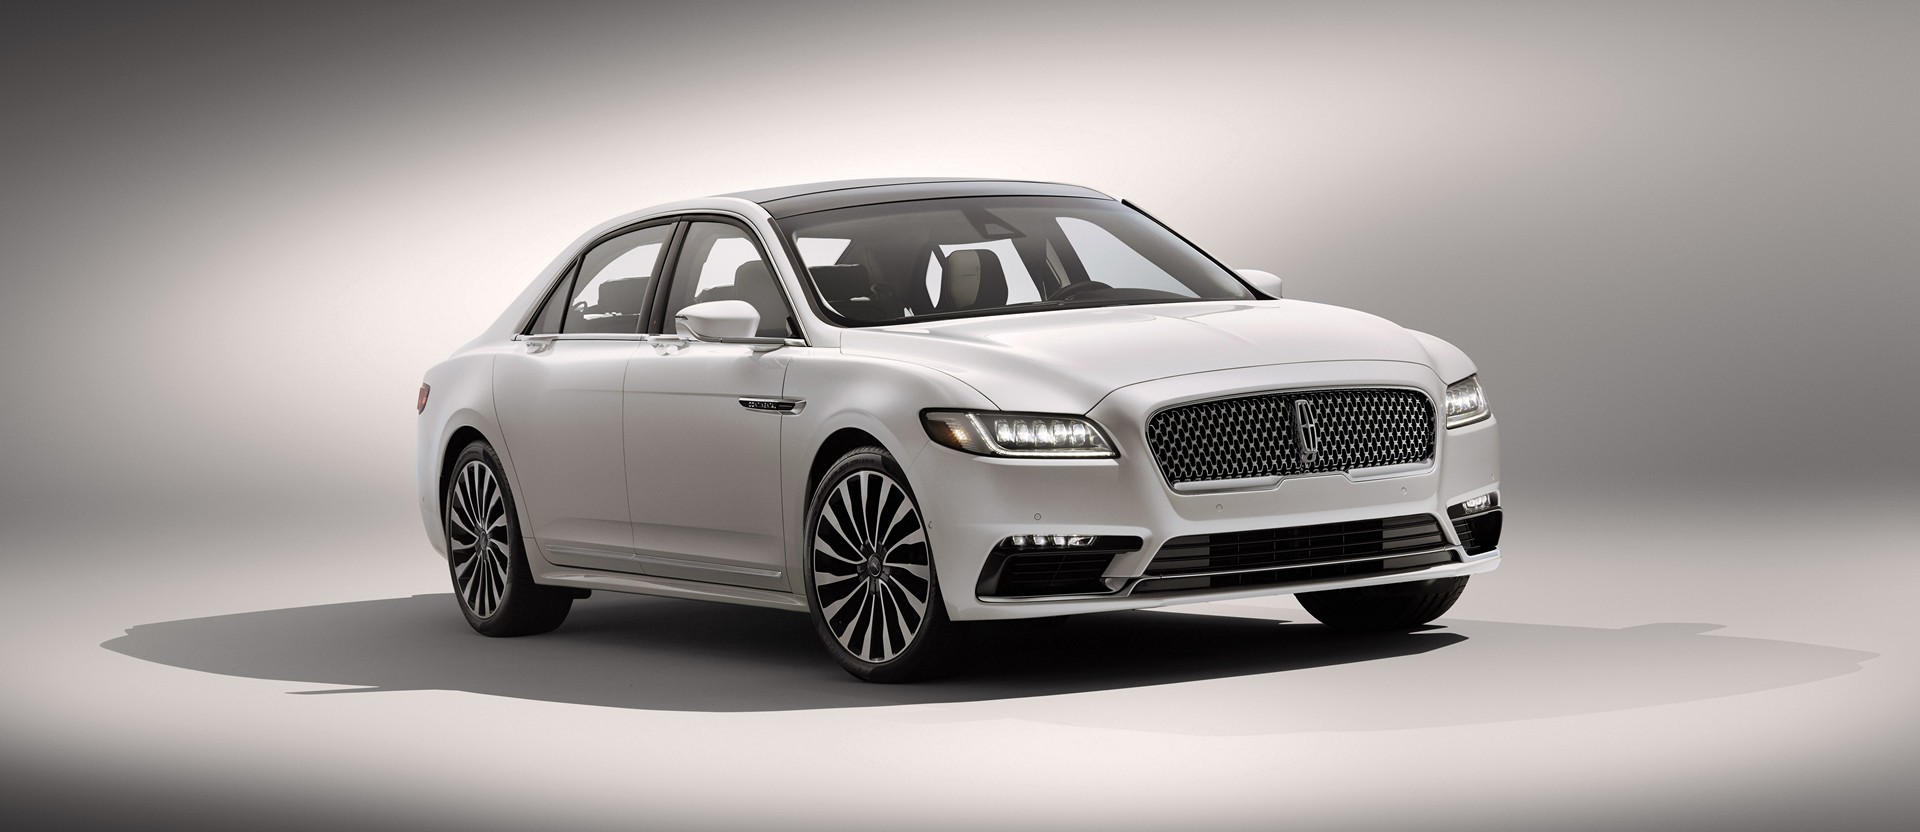 2017 Lincoln Continental © Ford Motor Company